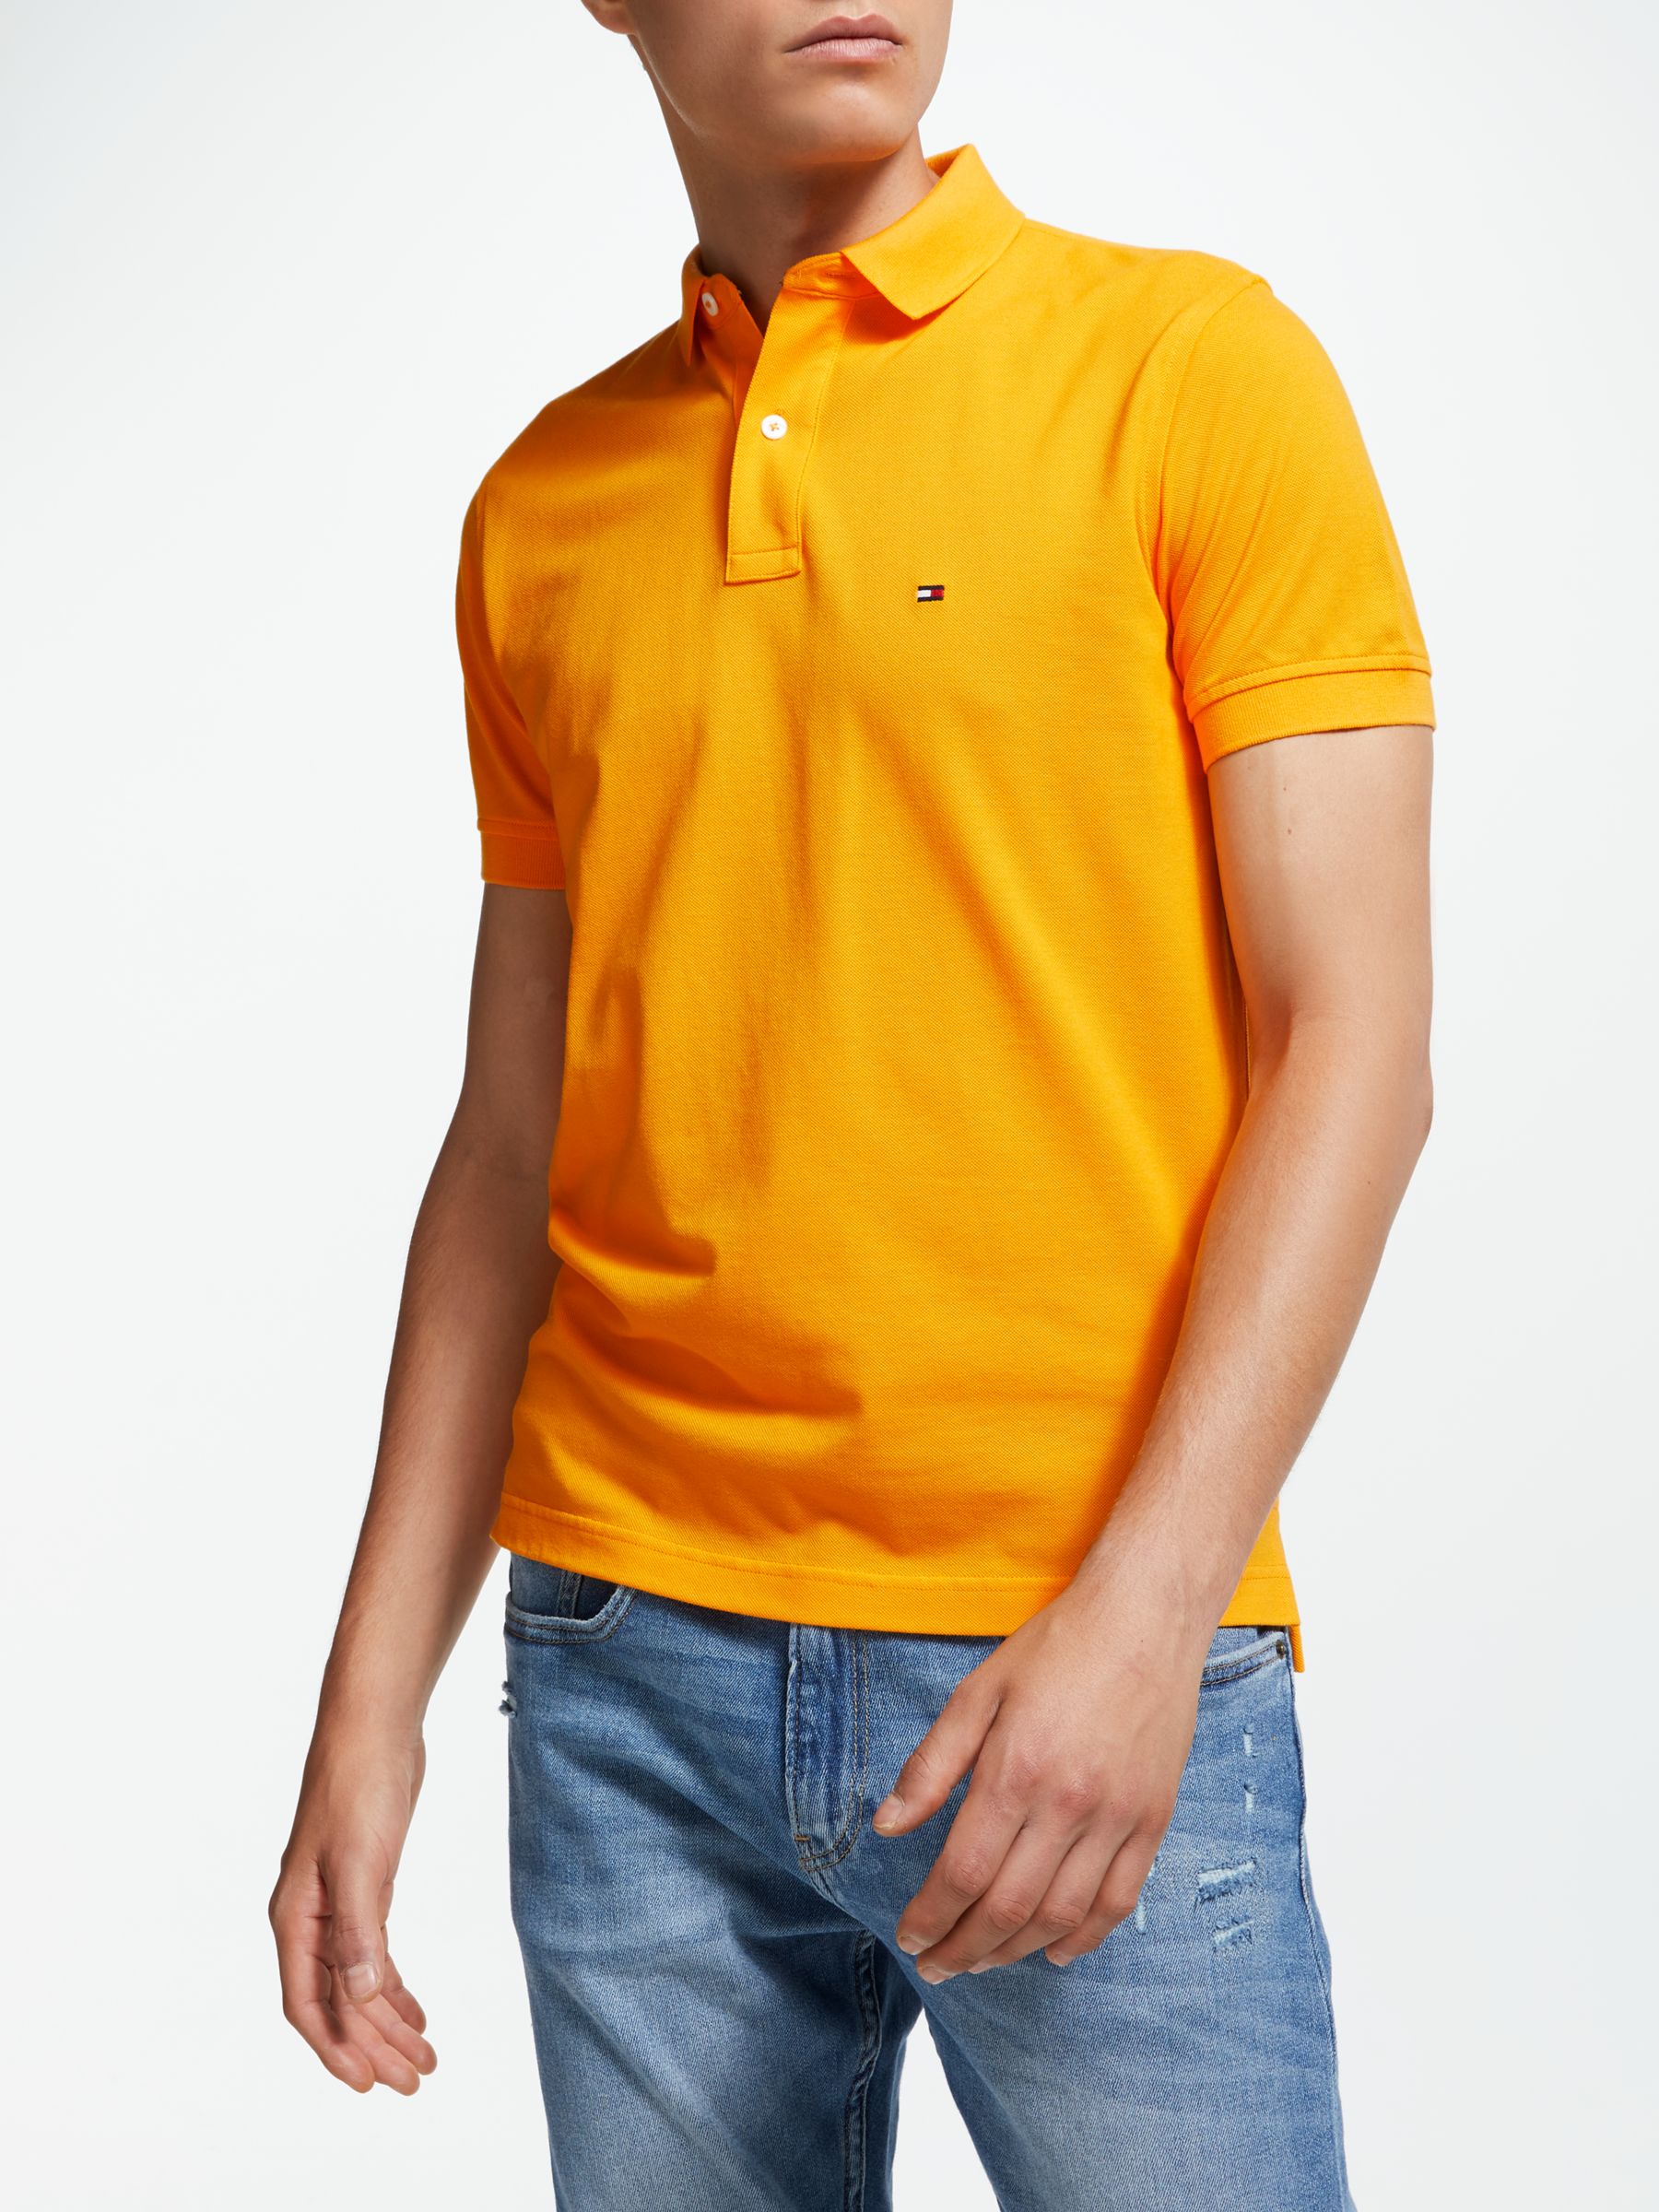 yellow tommy hilfiger polo shirt 